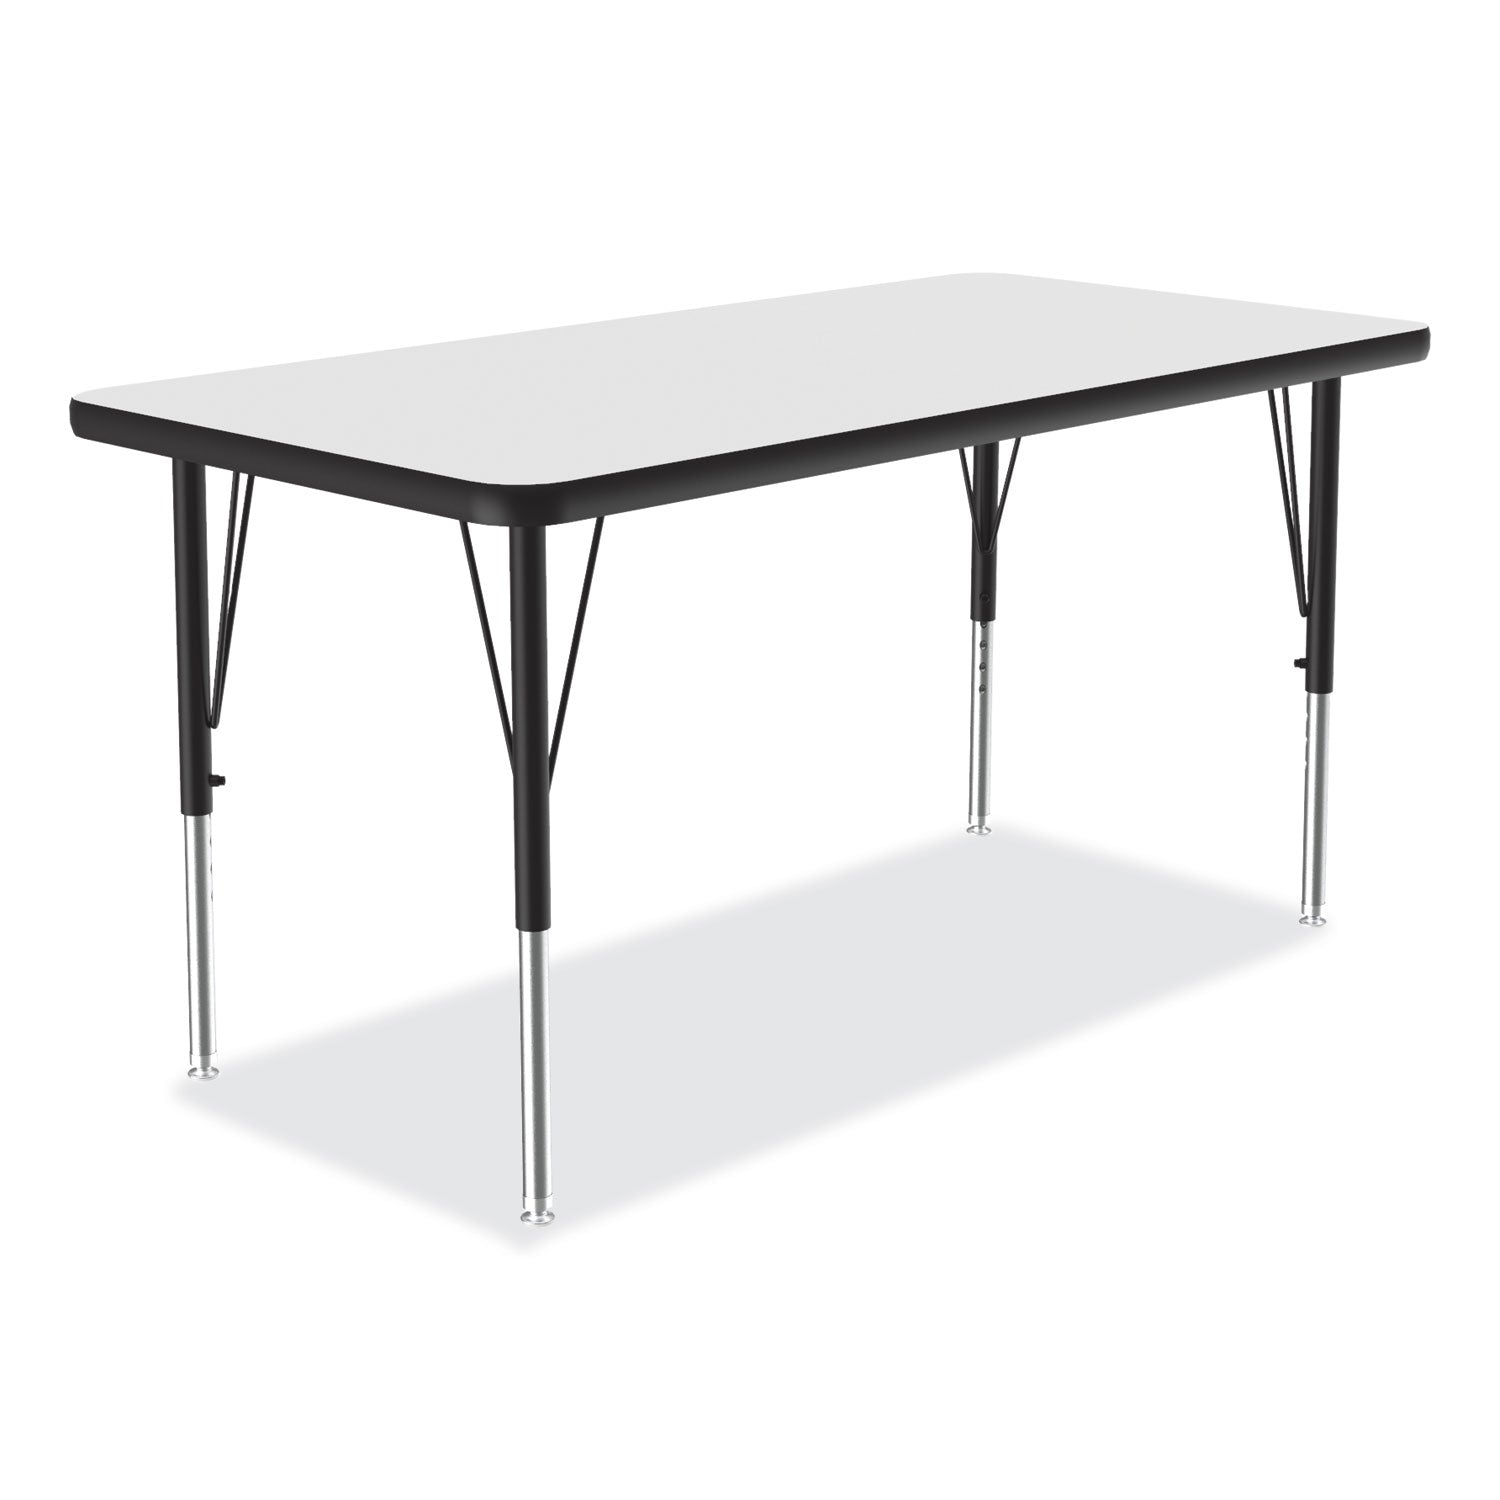 markerboard-activity-tables-rectangular-48-x-24-x-19-to-29-white-top-black-legs-4-pallet-ships-in-4-6-business-days_crl2448de80954p - 5